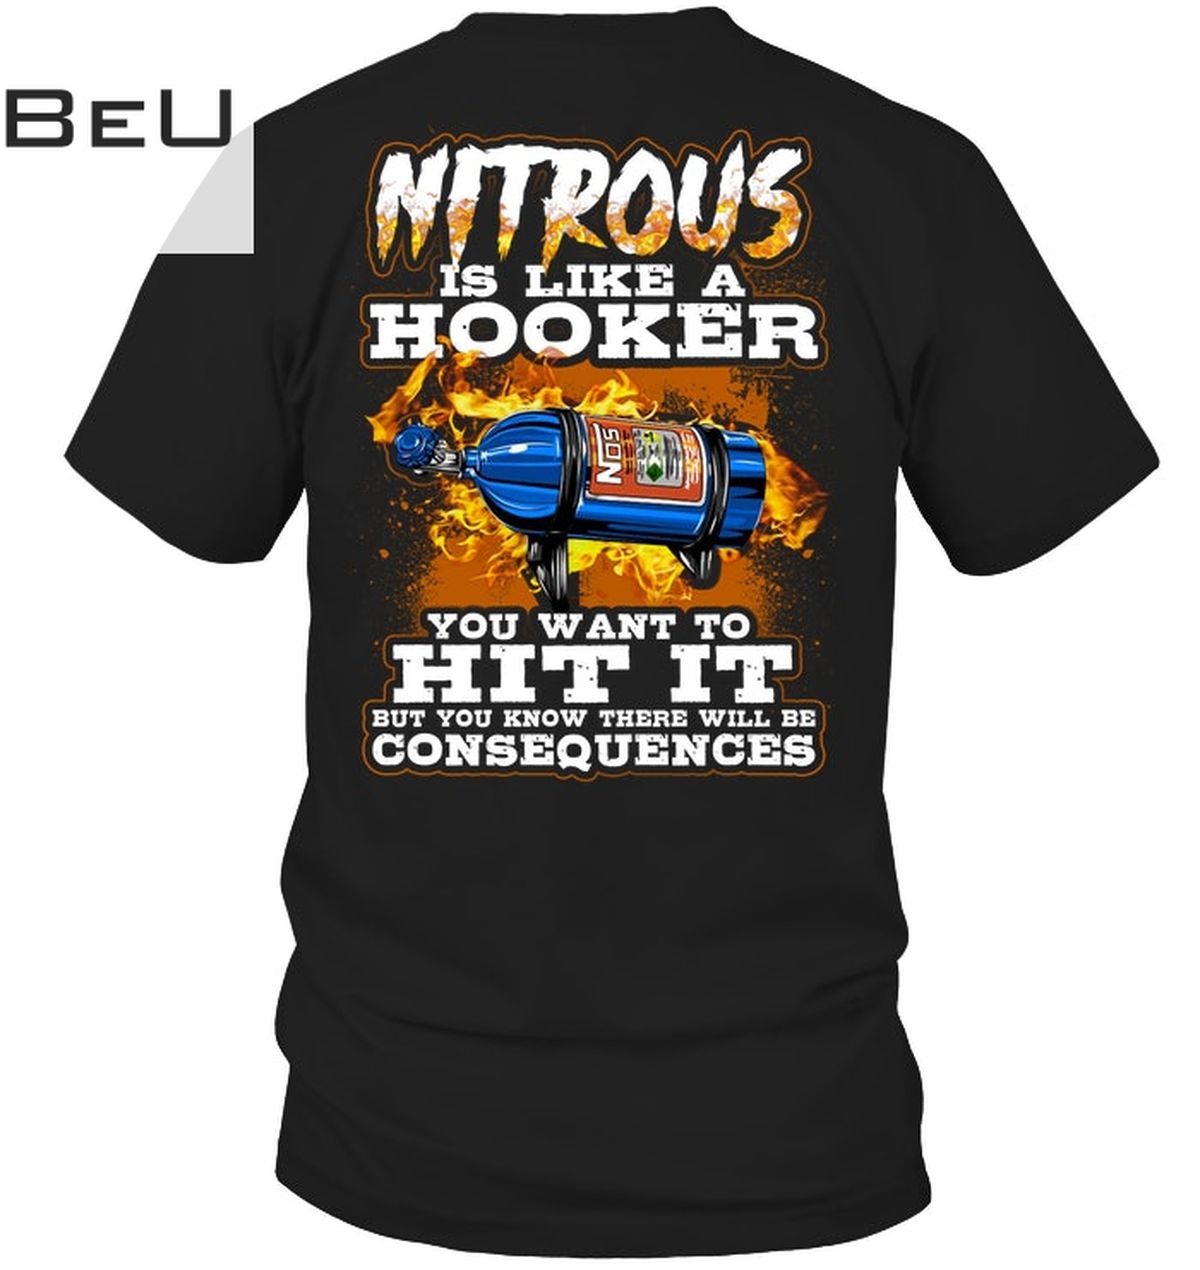 Nitrous Is Like A Hooker You Want To Hit It Shirt